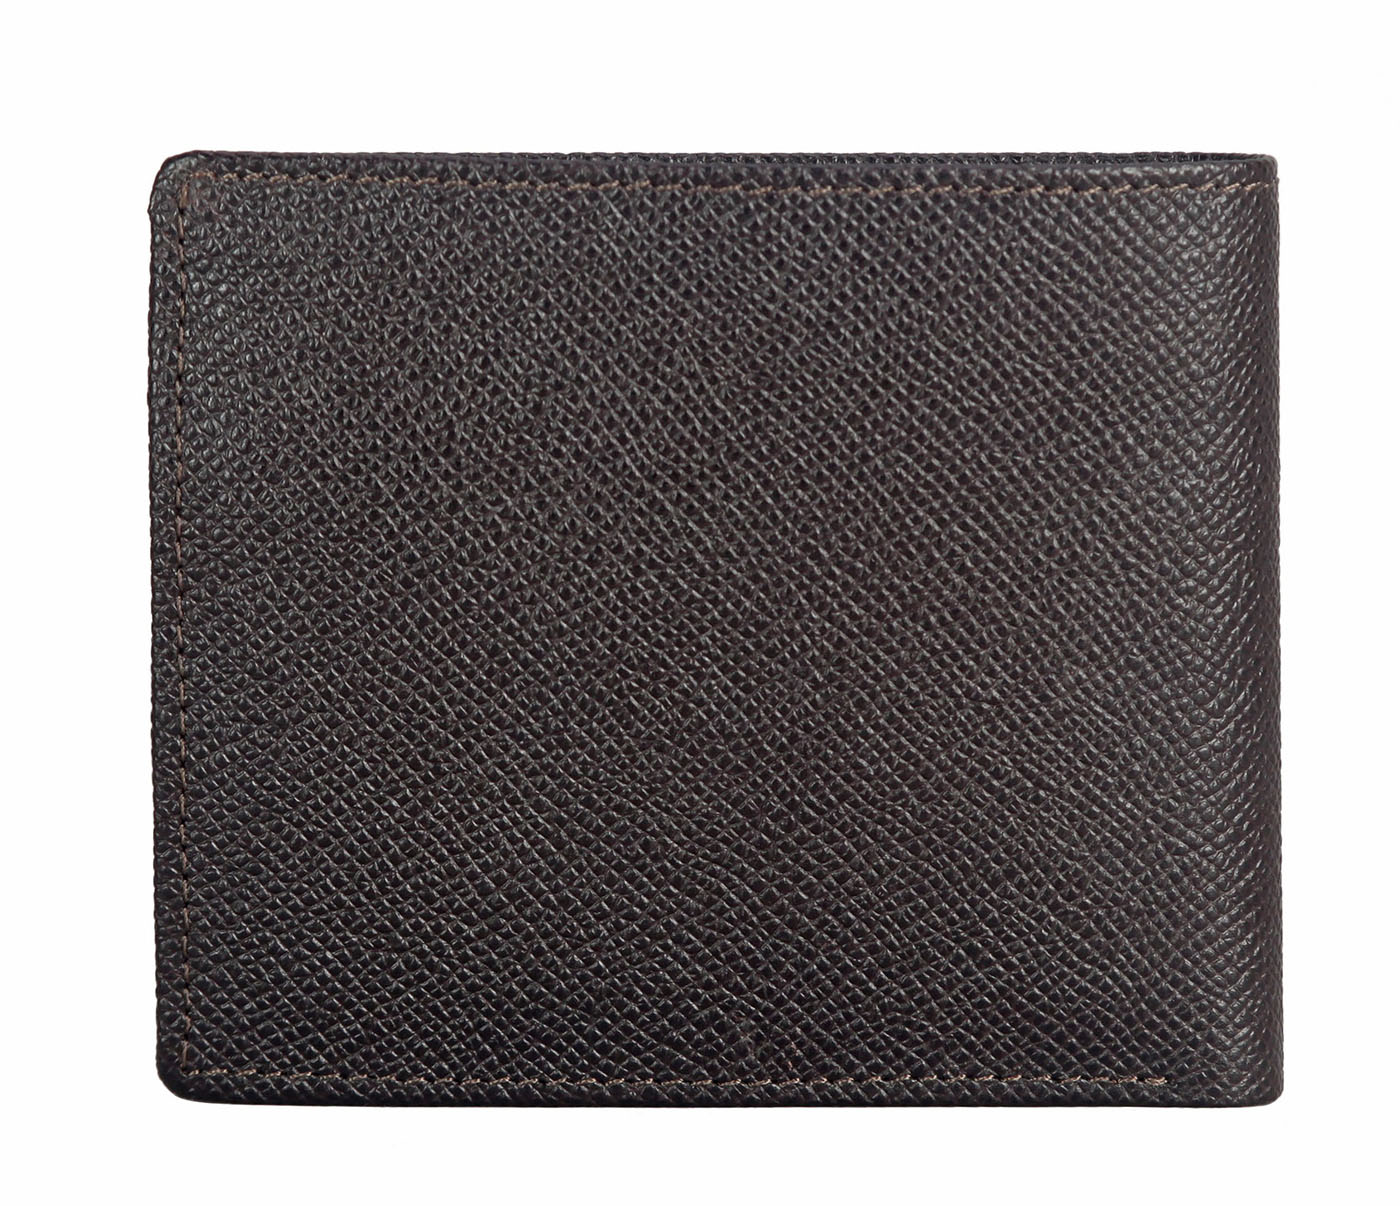 W310-Addler-Men's bifold wallet with coin pocket in Genuine Leather - Brown